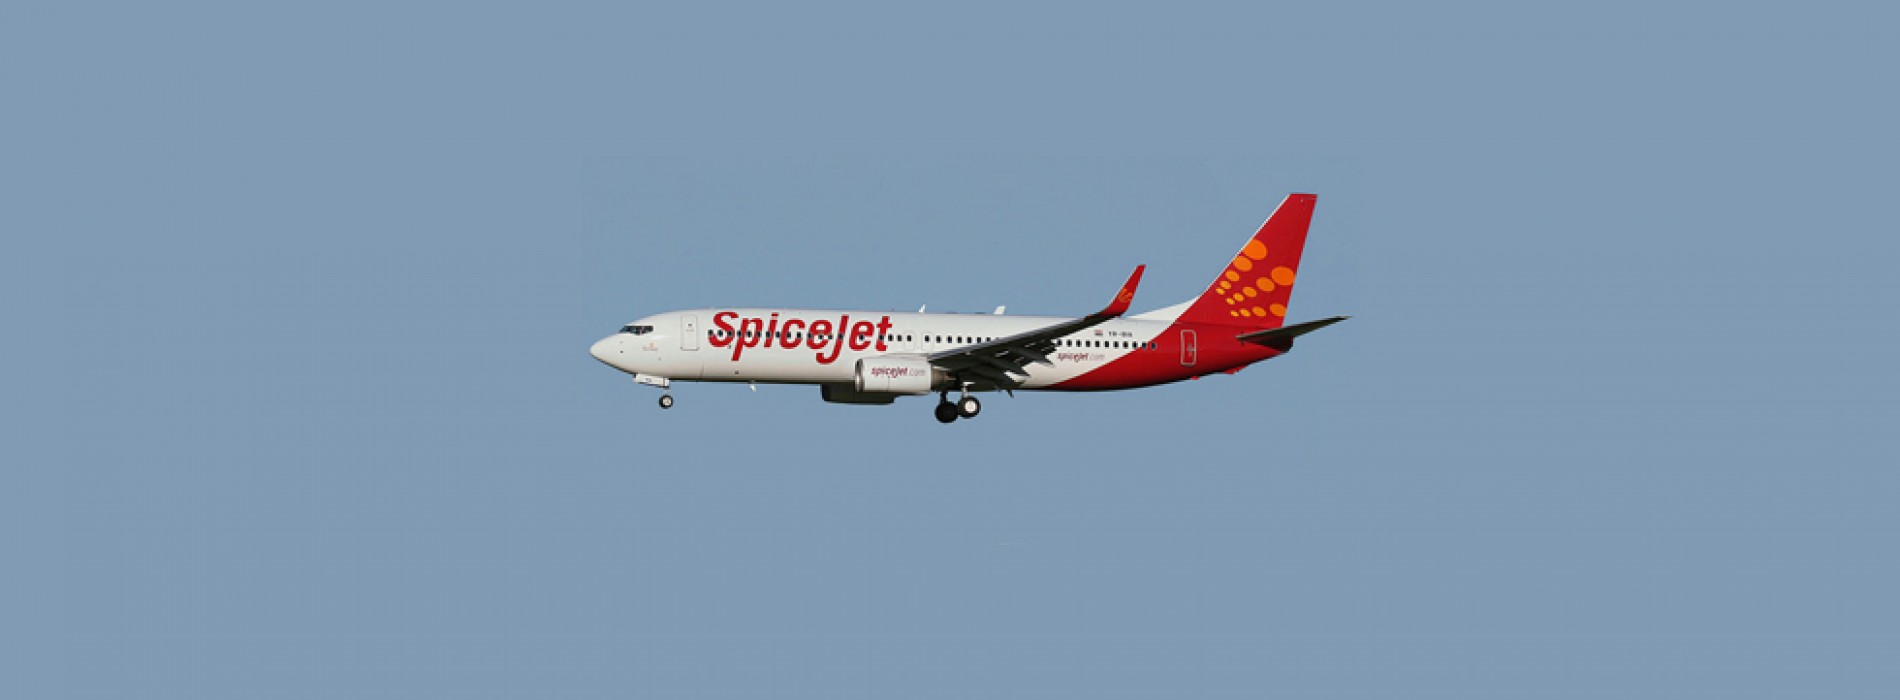 SpiceJet to launch flights to Dibrugarh from October 3